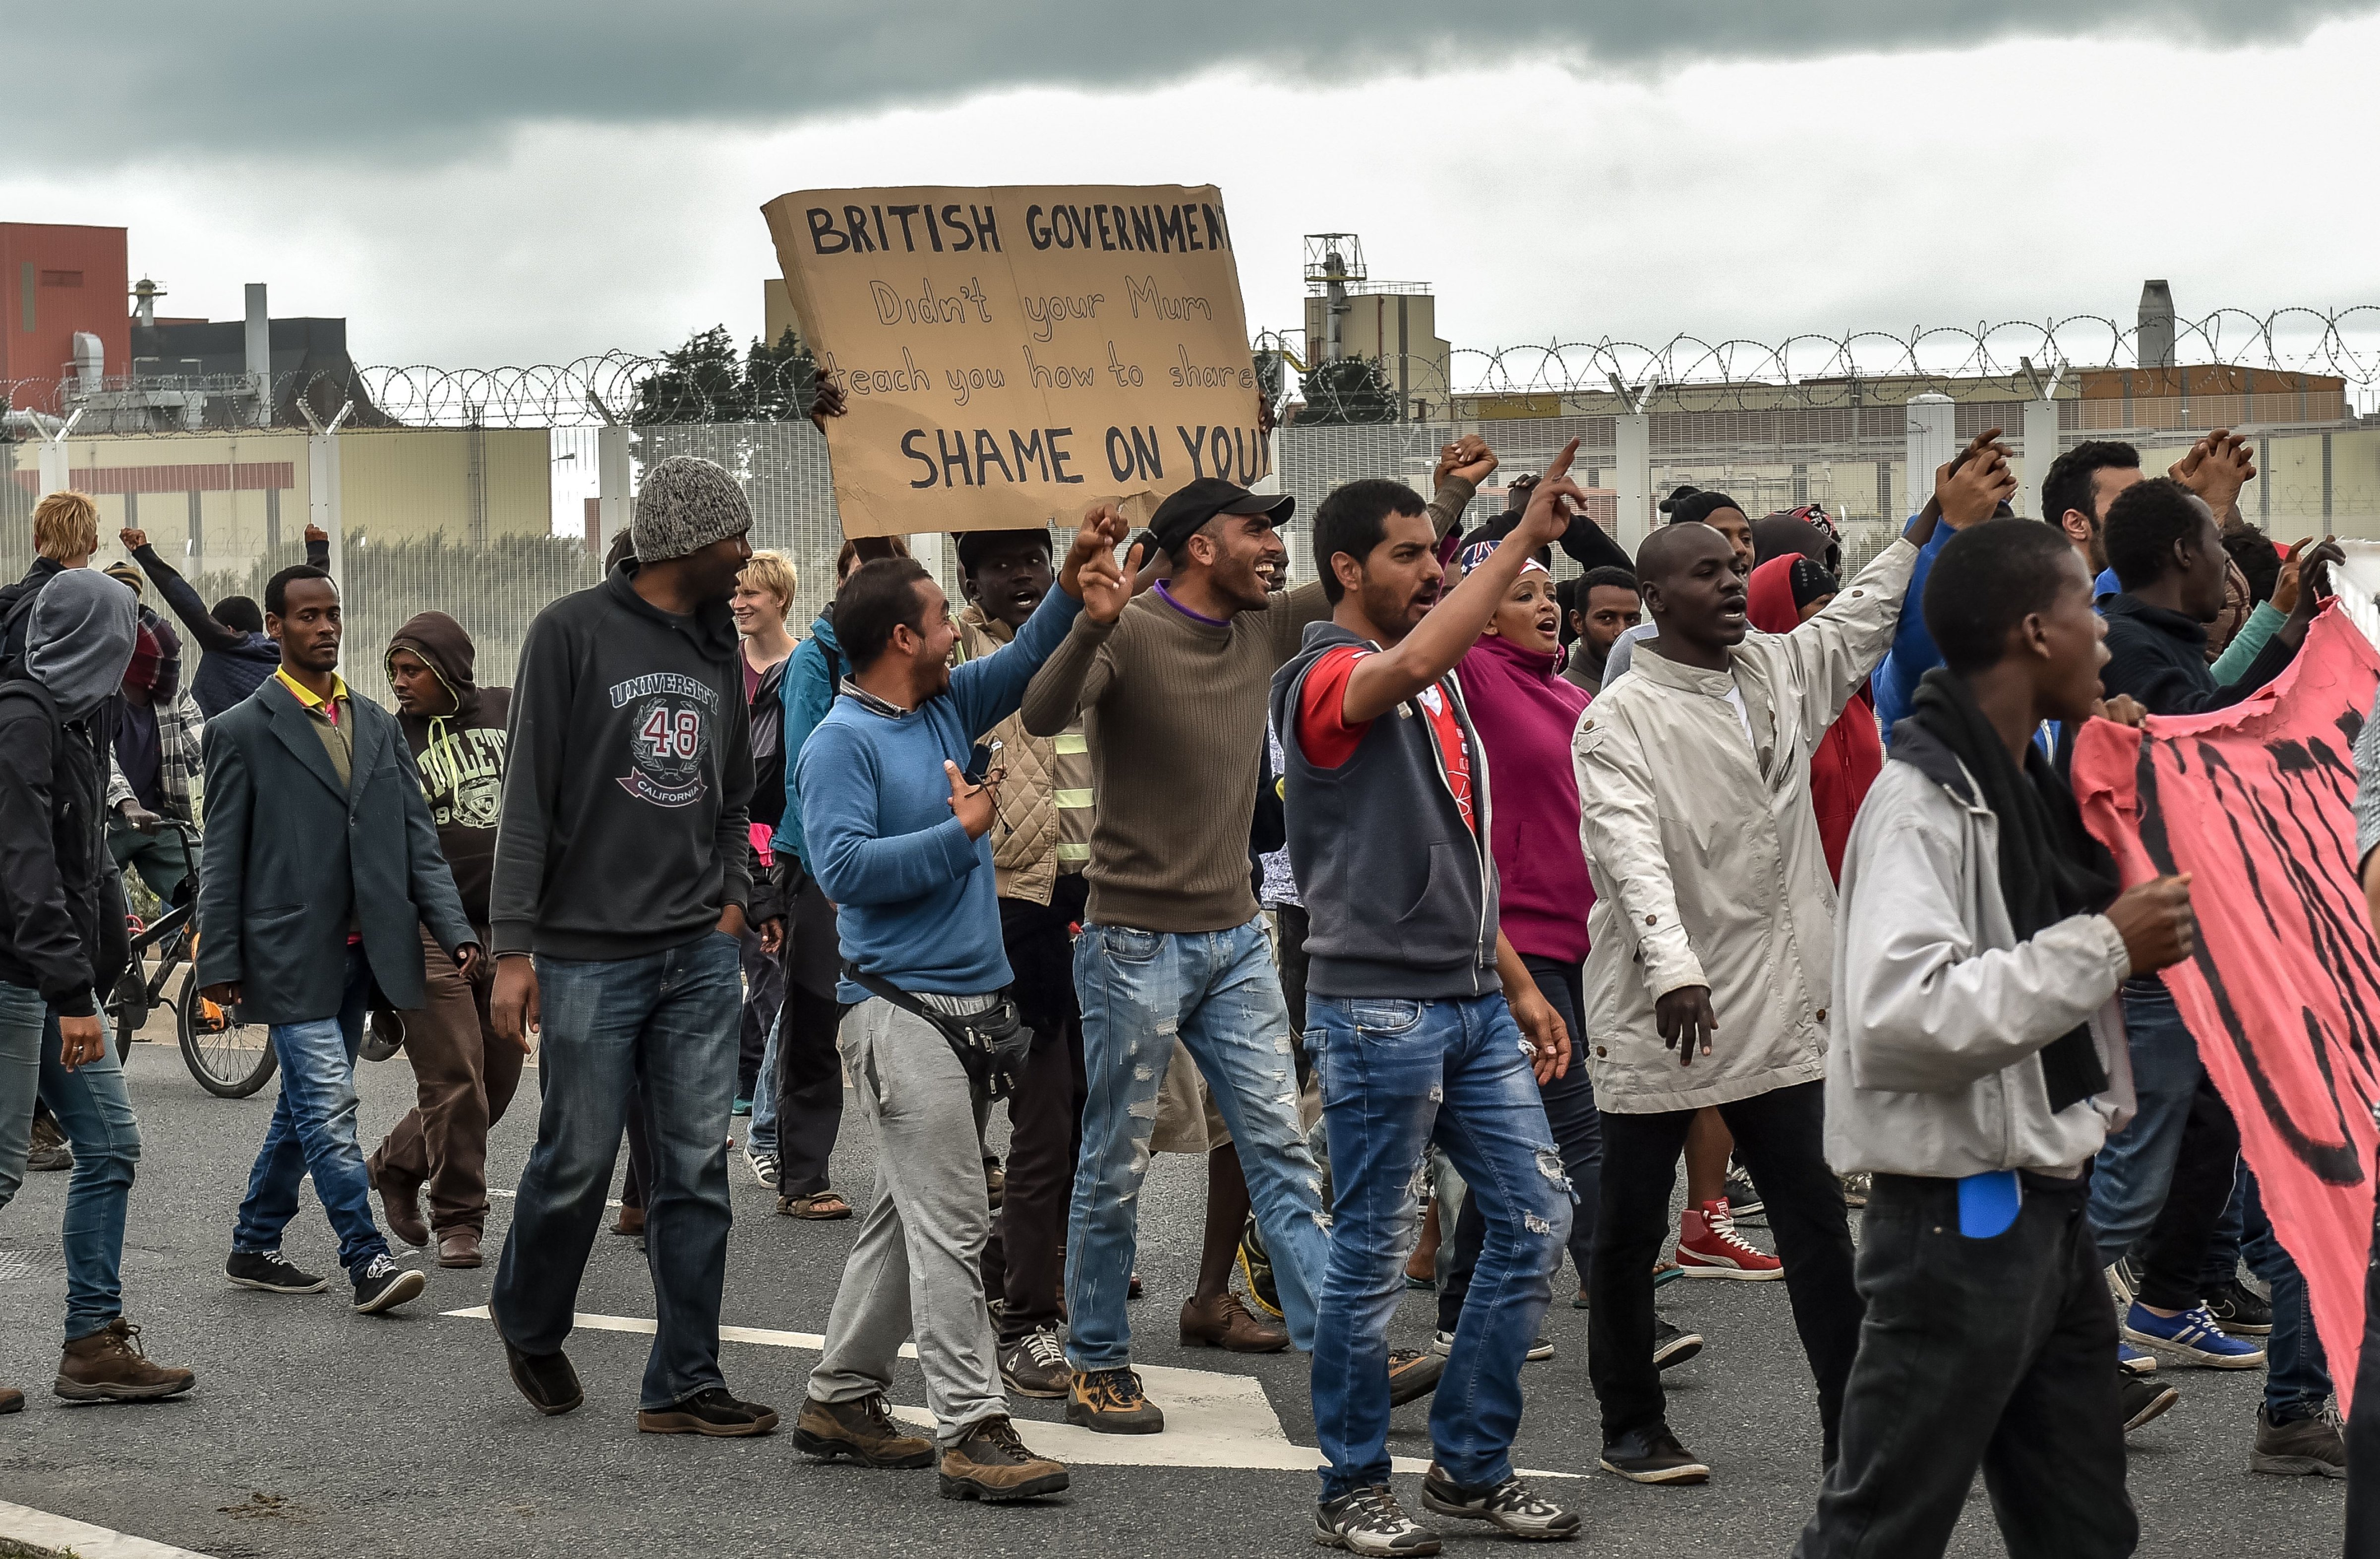 Illegal migrants demonstrate against British government, on Aug. 20, 2015 in Calais, (Philippe Huguen—AFP/Getty Images)